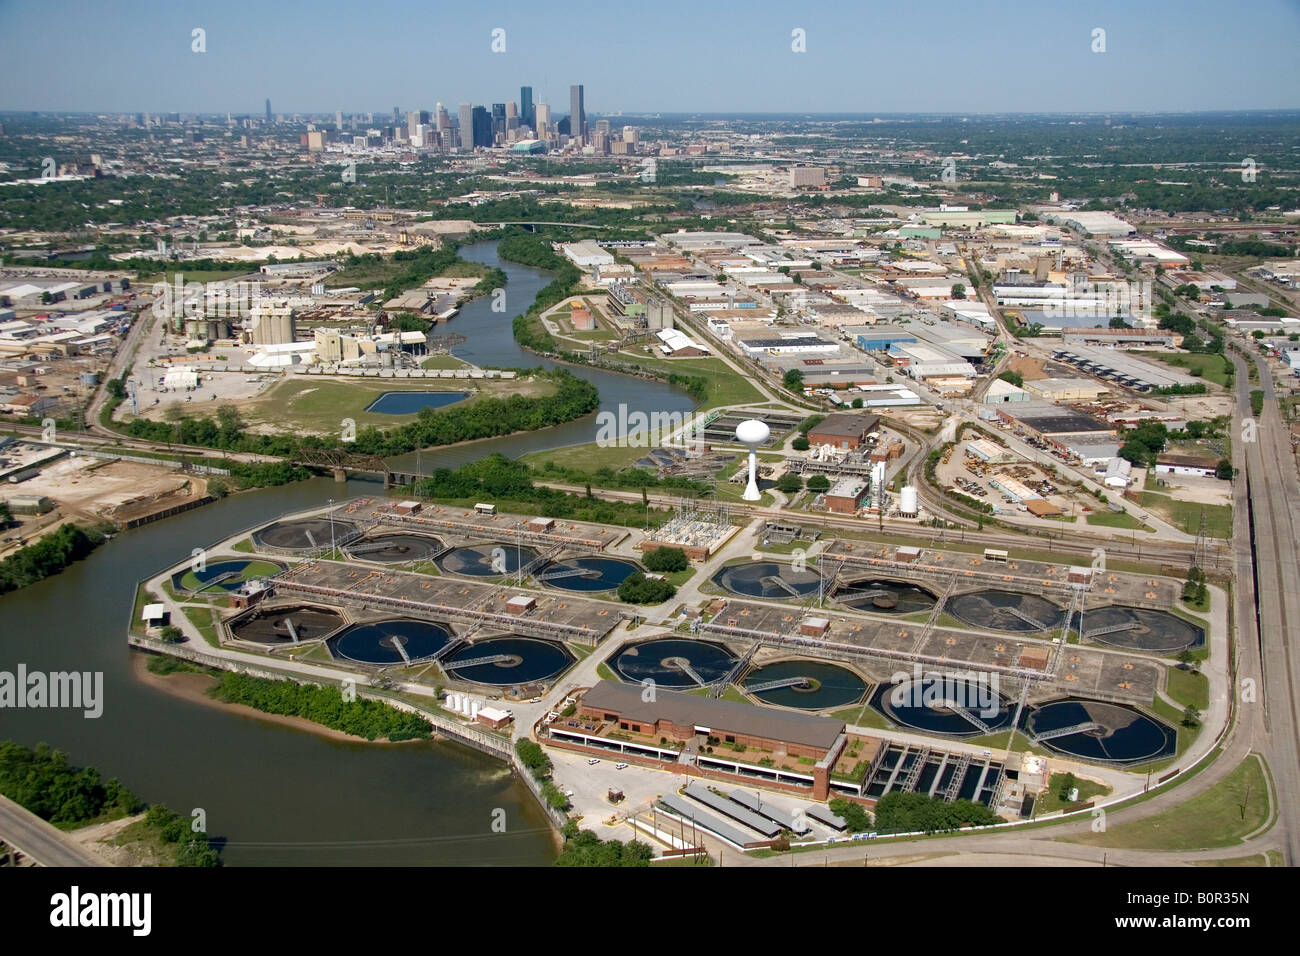 Aerial view of a sewage treatment facility along the Houston Ship Channel in Houston Texas Stock Photo